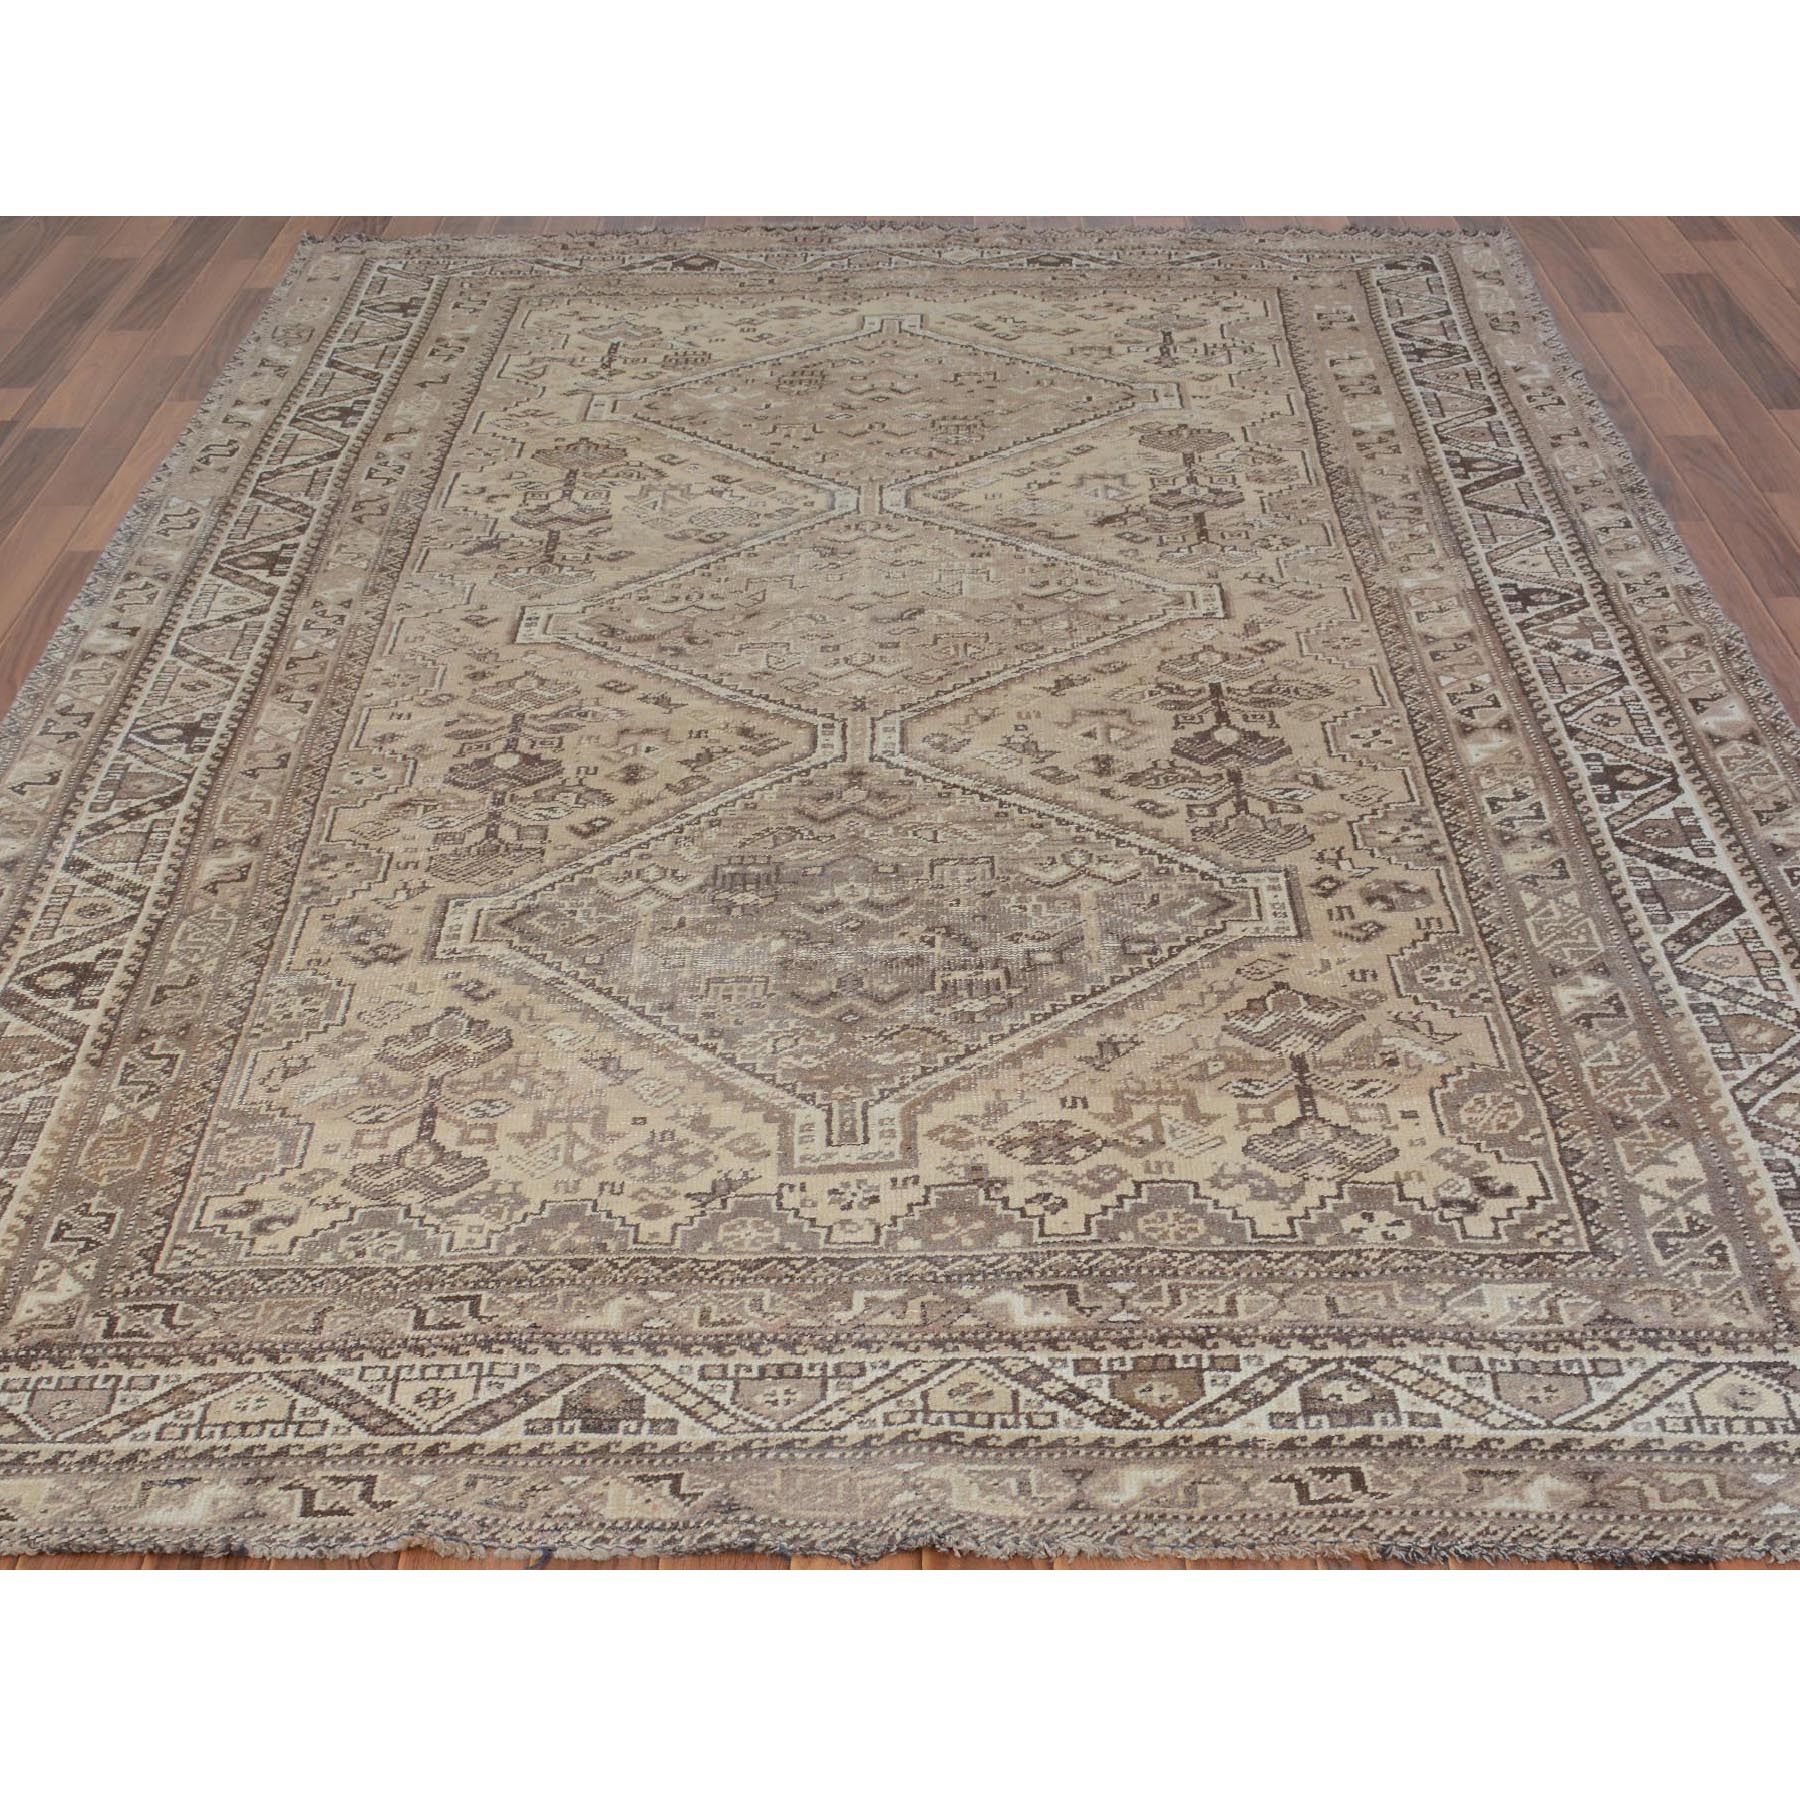 6-8 x10-3  Natural Colors Washed Out Vintage and Worn Down Persian Shiraz Hand Knotted Oriental Rug 